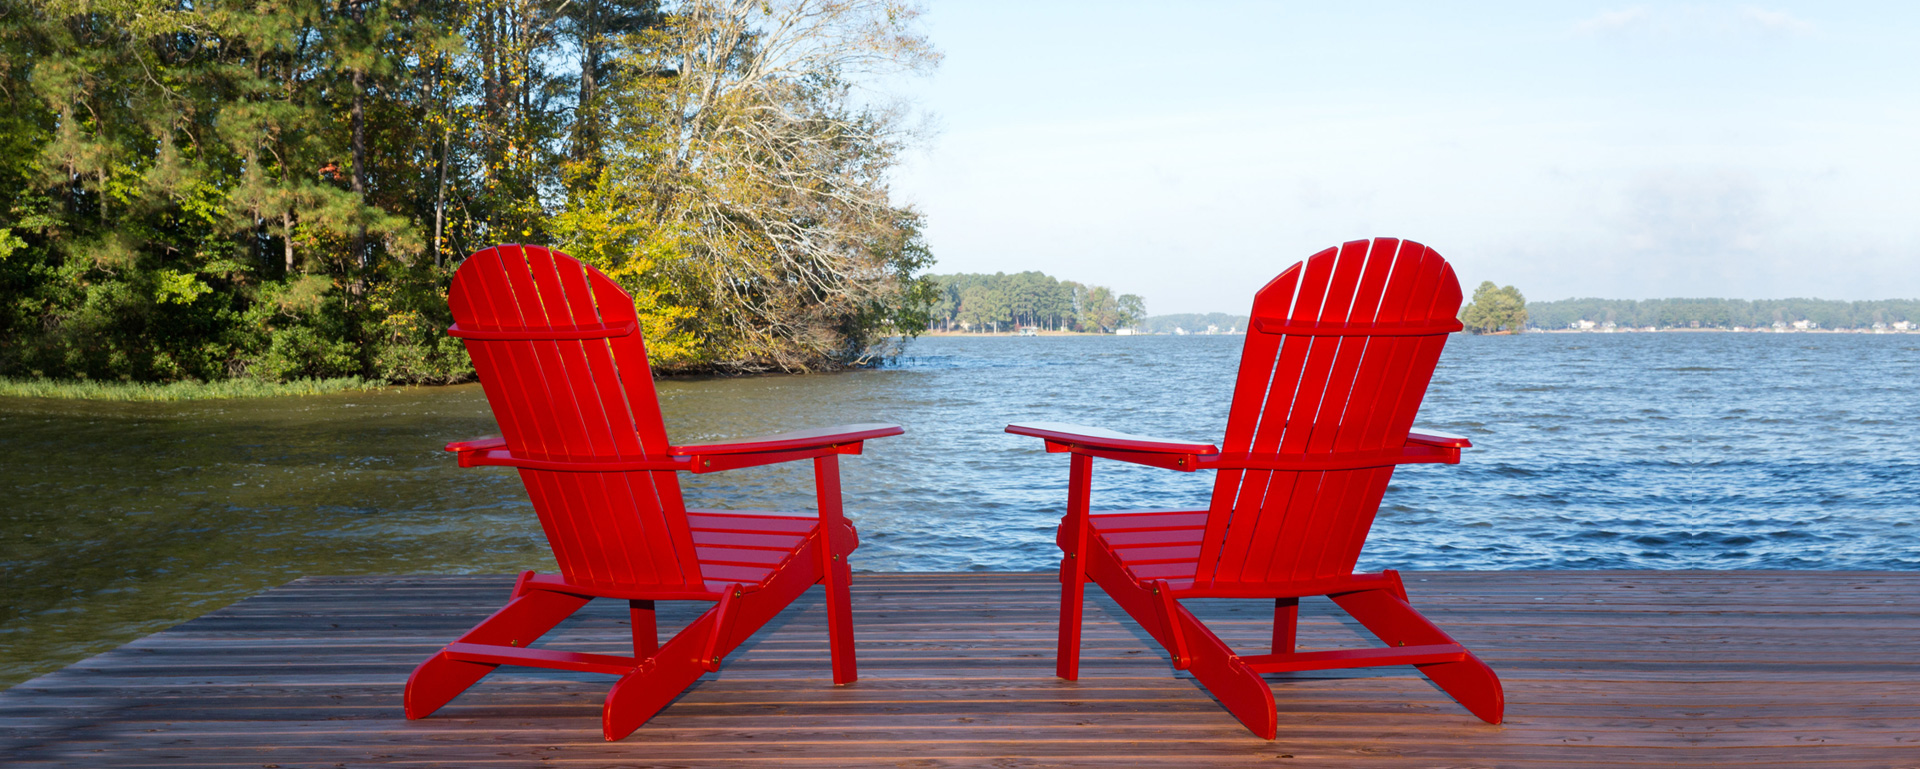 red chairs on dock at lake Gaston